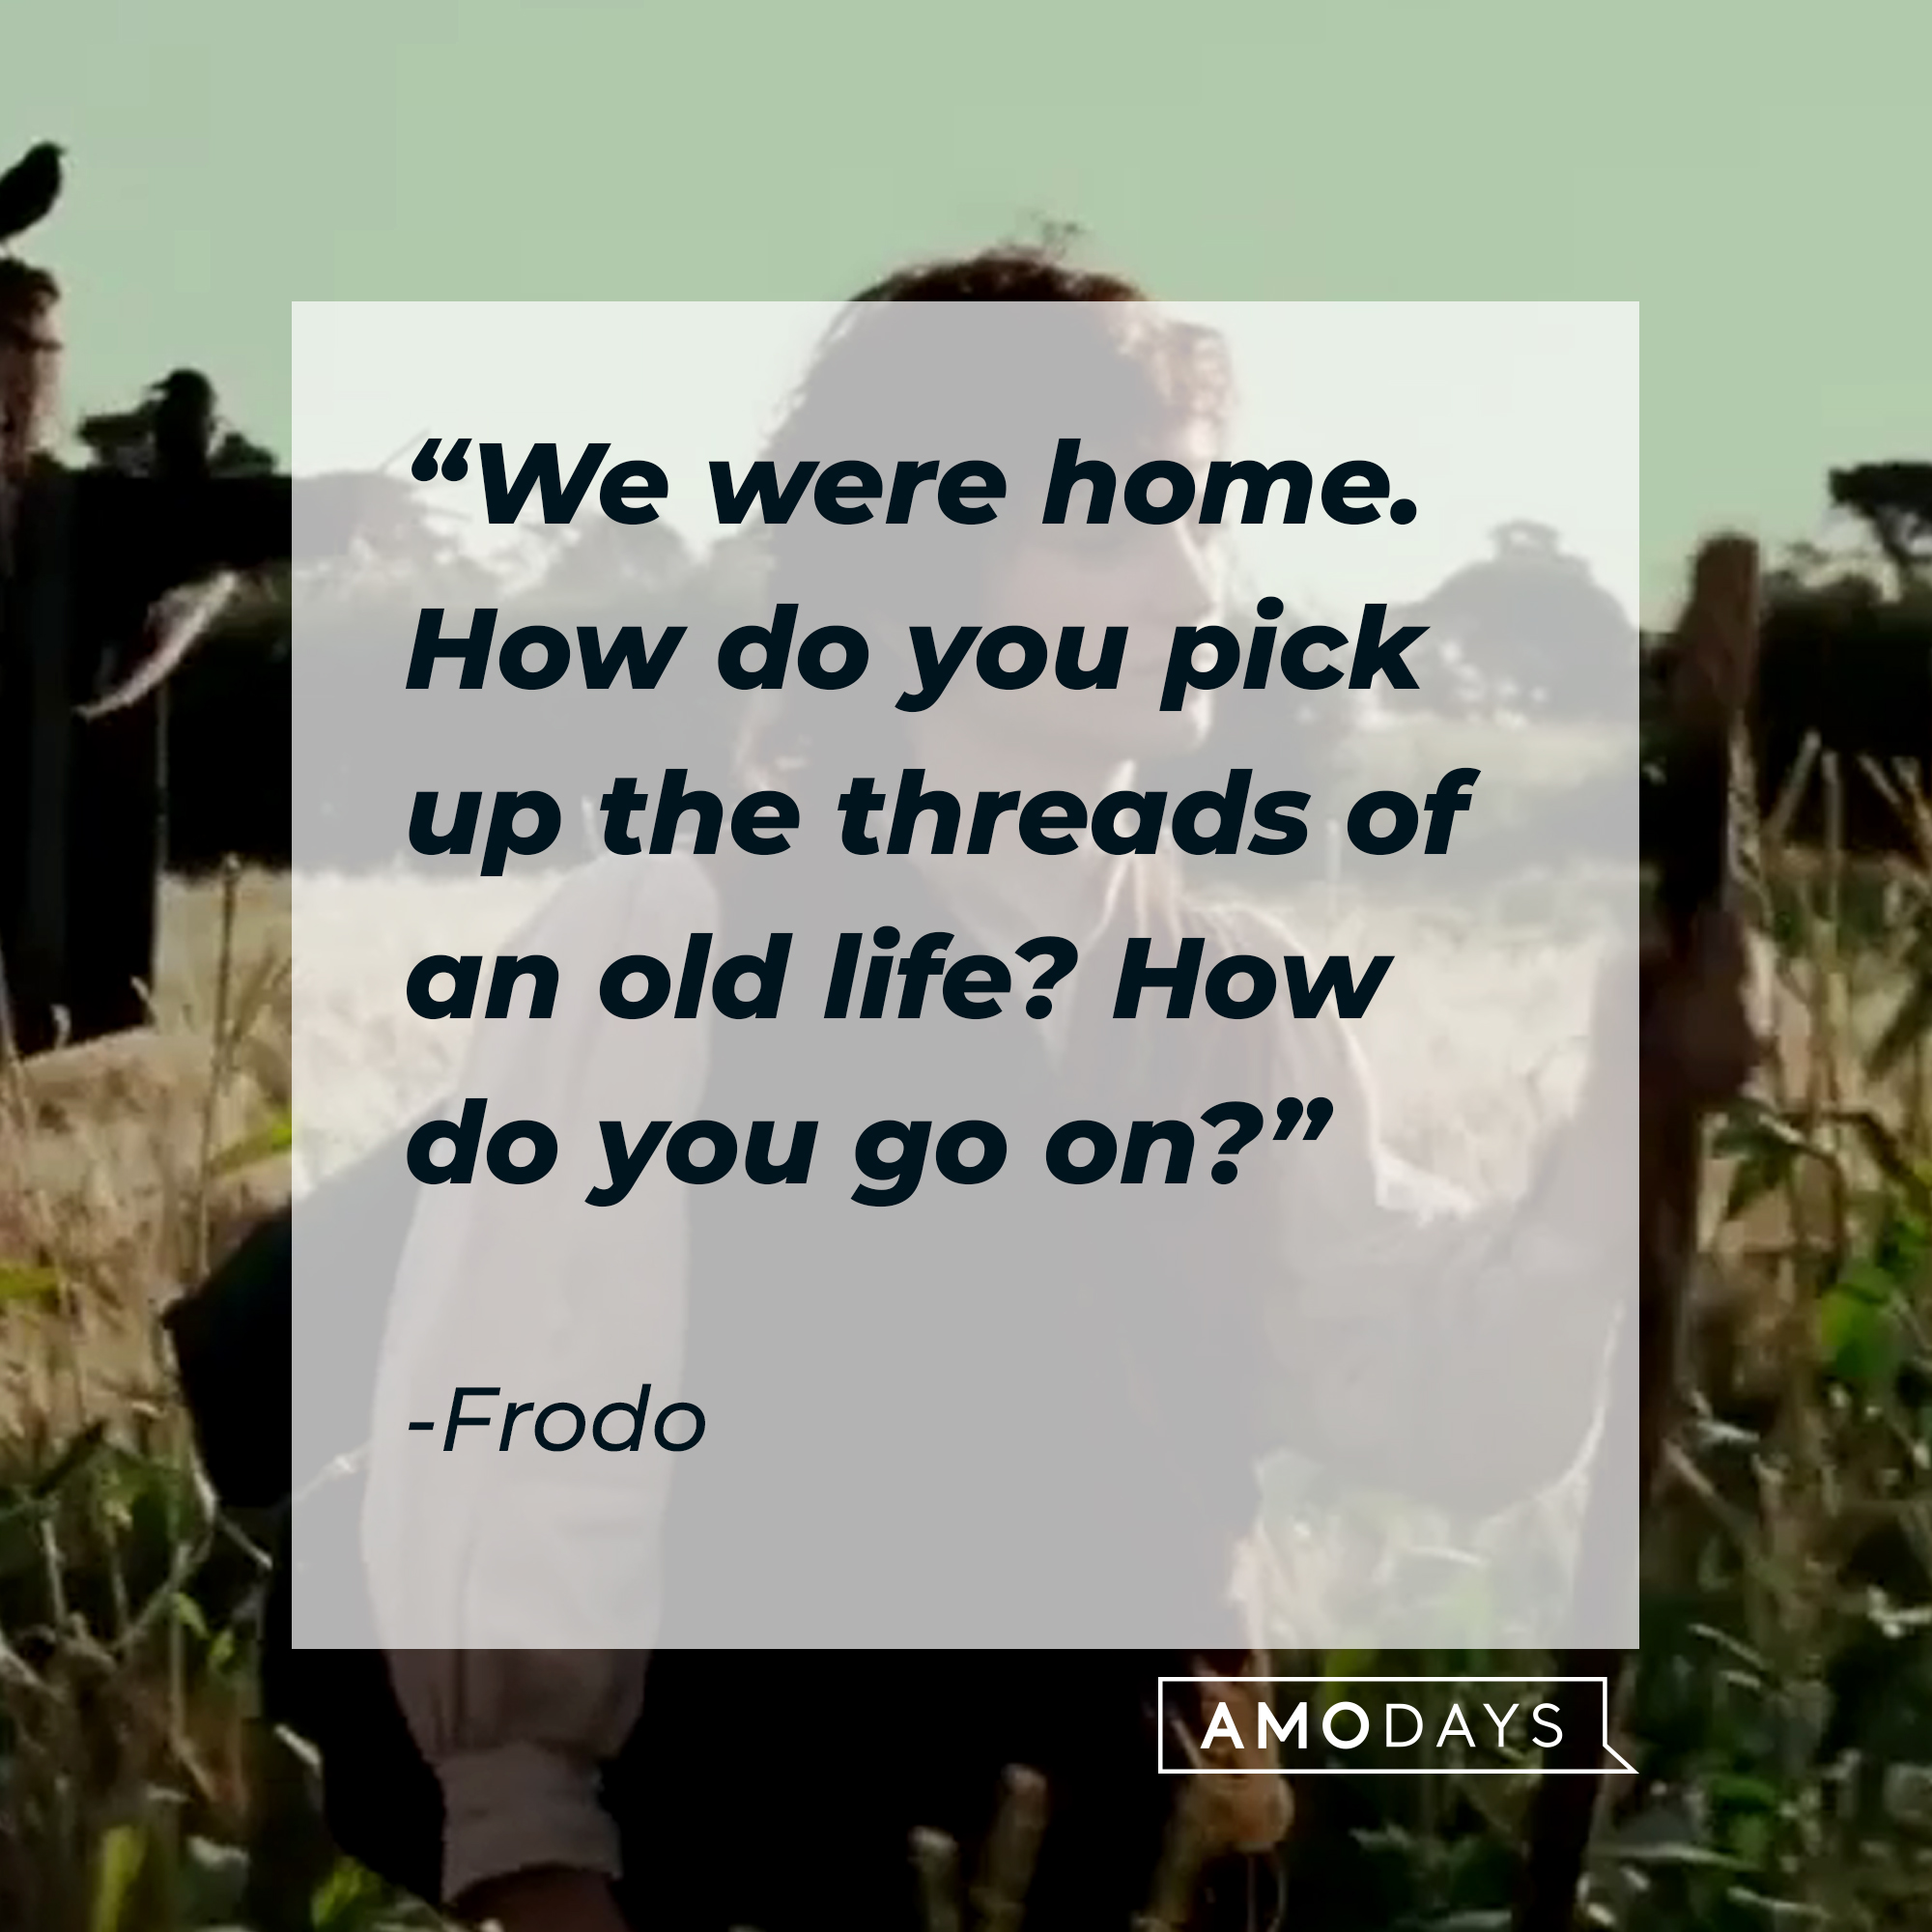 A photo of Frodo baggins with the quote, "We were home. How do you pick up the threads of an old life? How do you go on?" | Source: Facebook/lordoftheringstrilogy